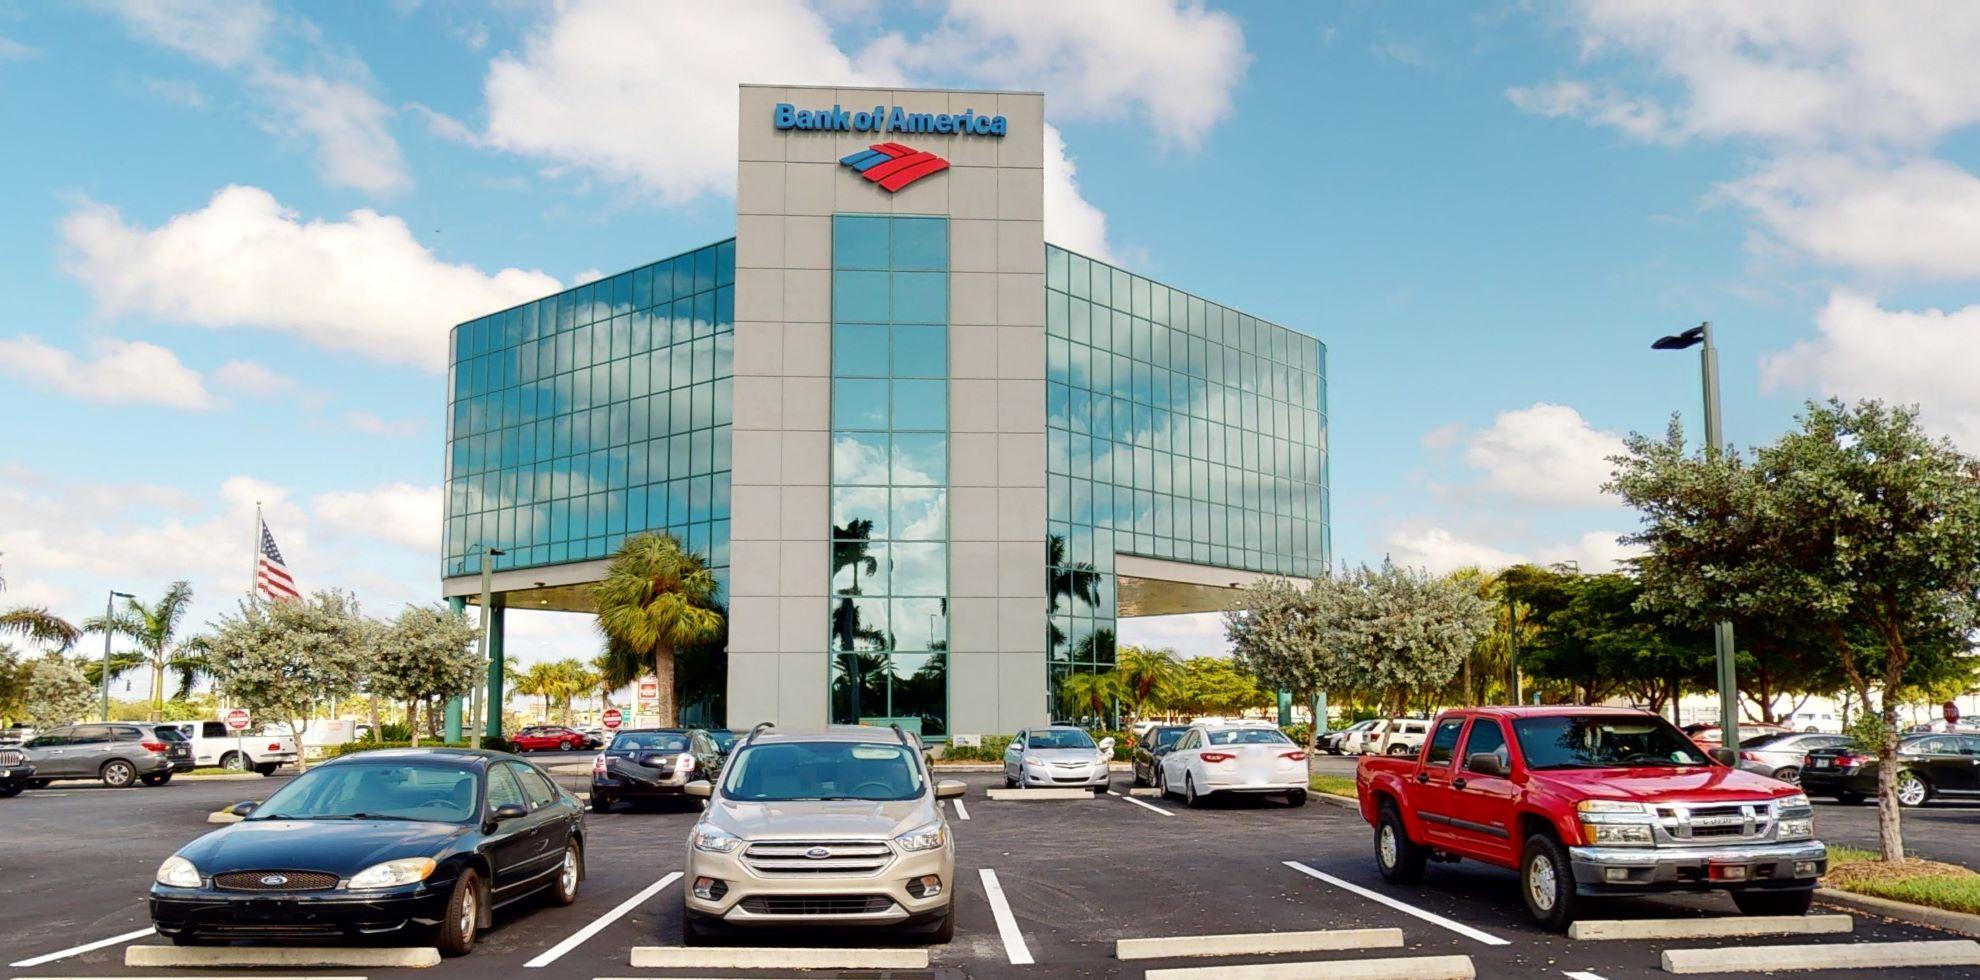 Bank of America financial center with drive-thru ATM | 13099 US Highway 41 SE, Fort Myers, FL 33907